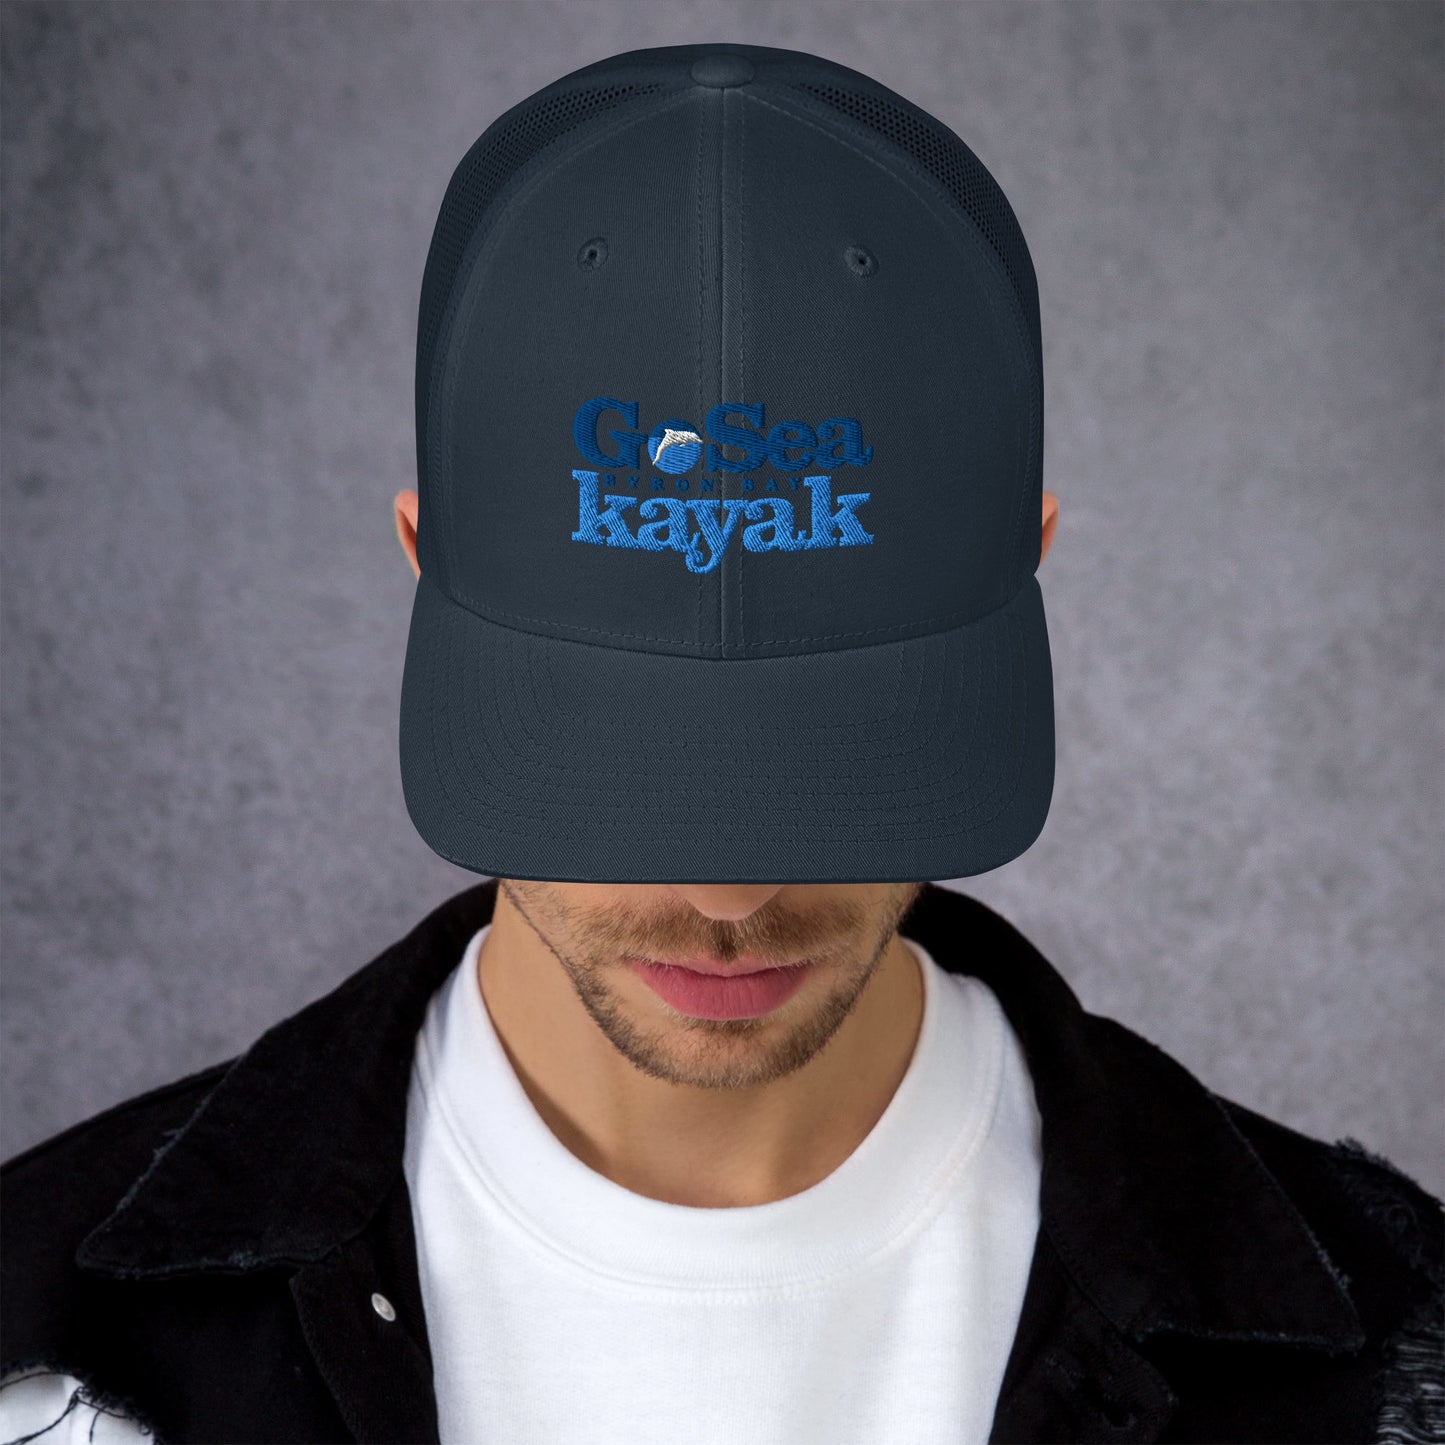  Trucker Cap - Navy - Front view - being warn by man with his head down - Go Sea Kayak Byron Bay logo on front - Genuine Byron Bay Merchandise | Produced by Go Sea Kayak Byron Bay 